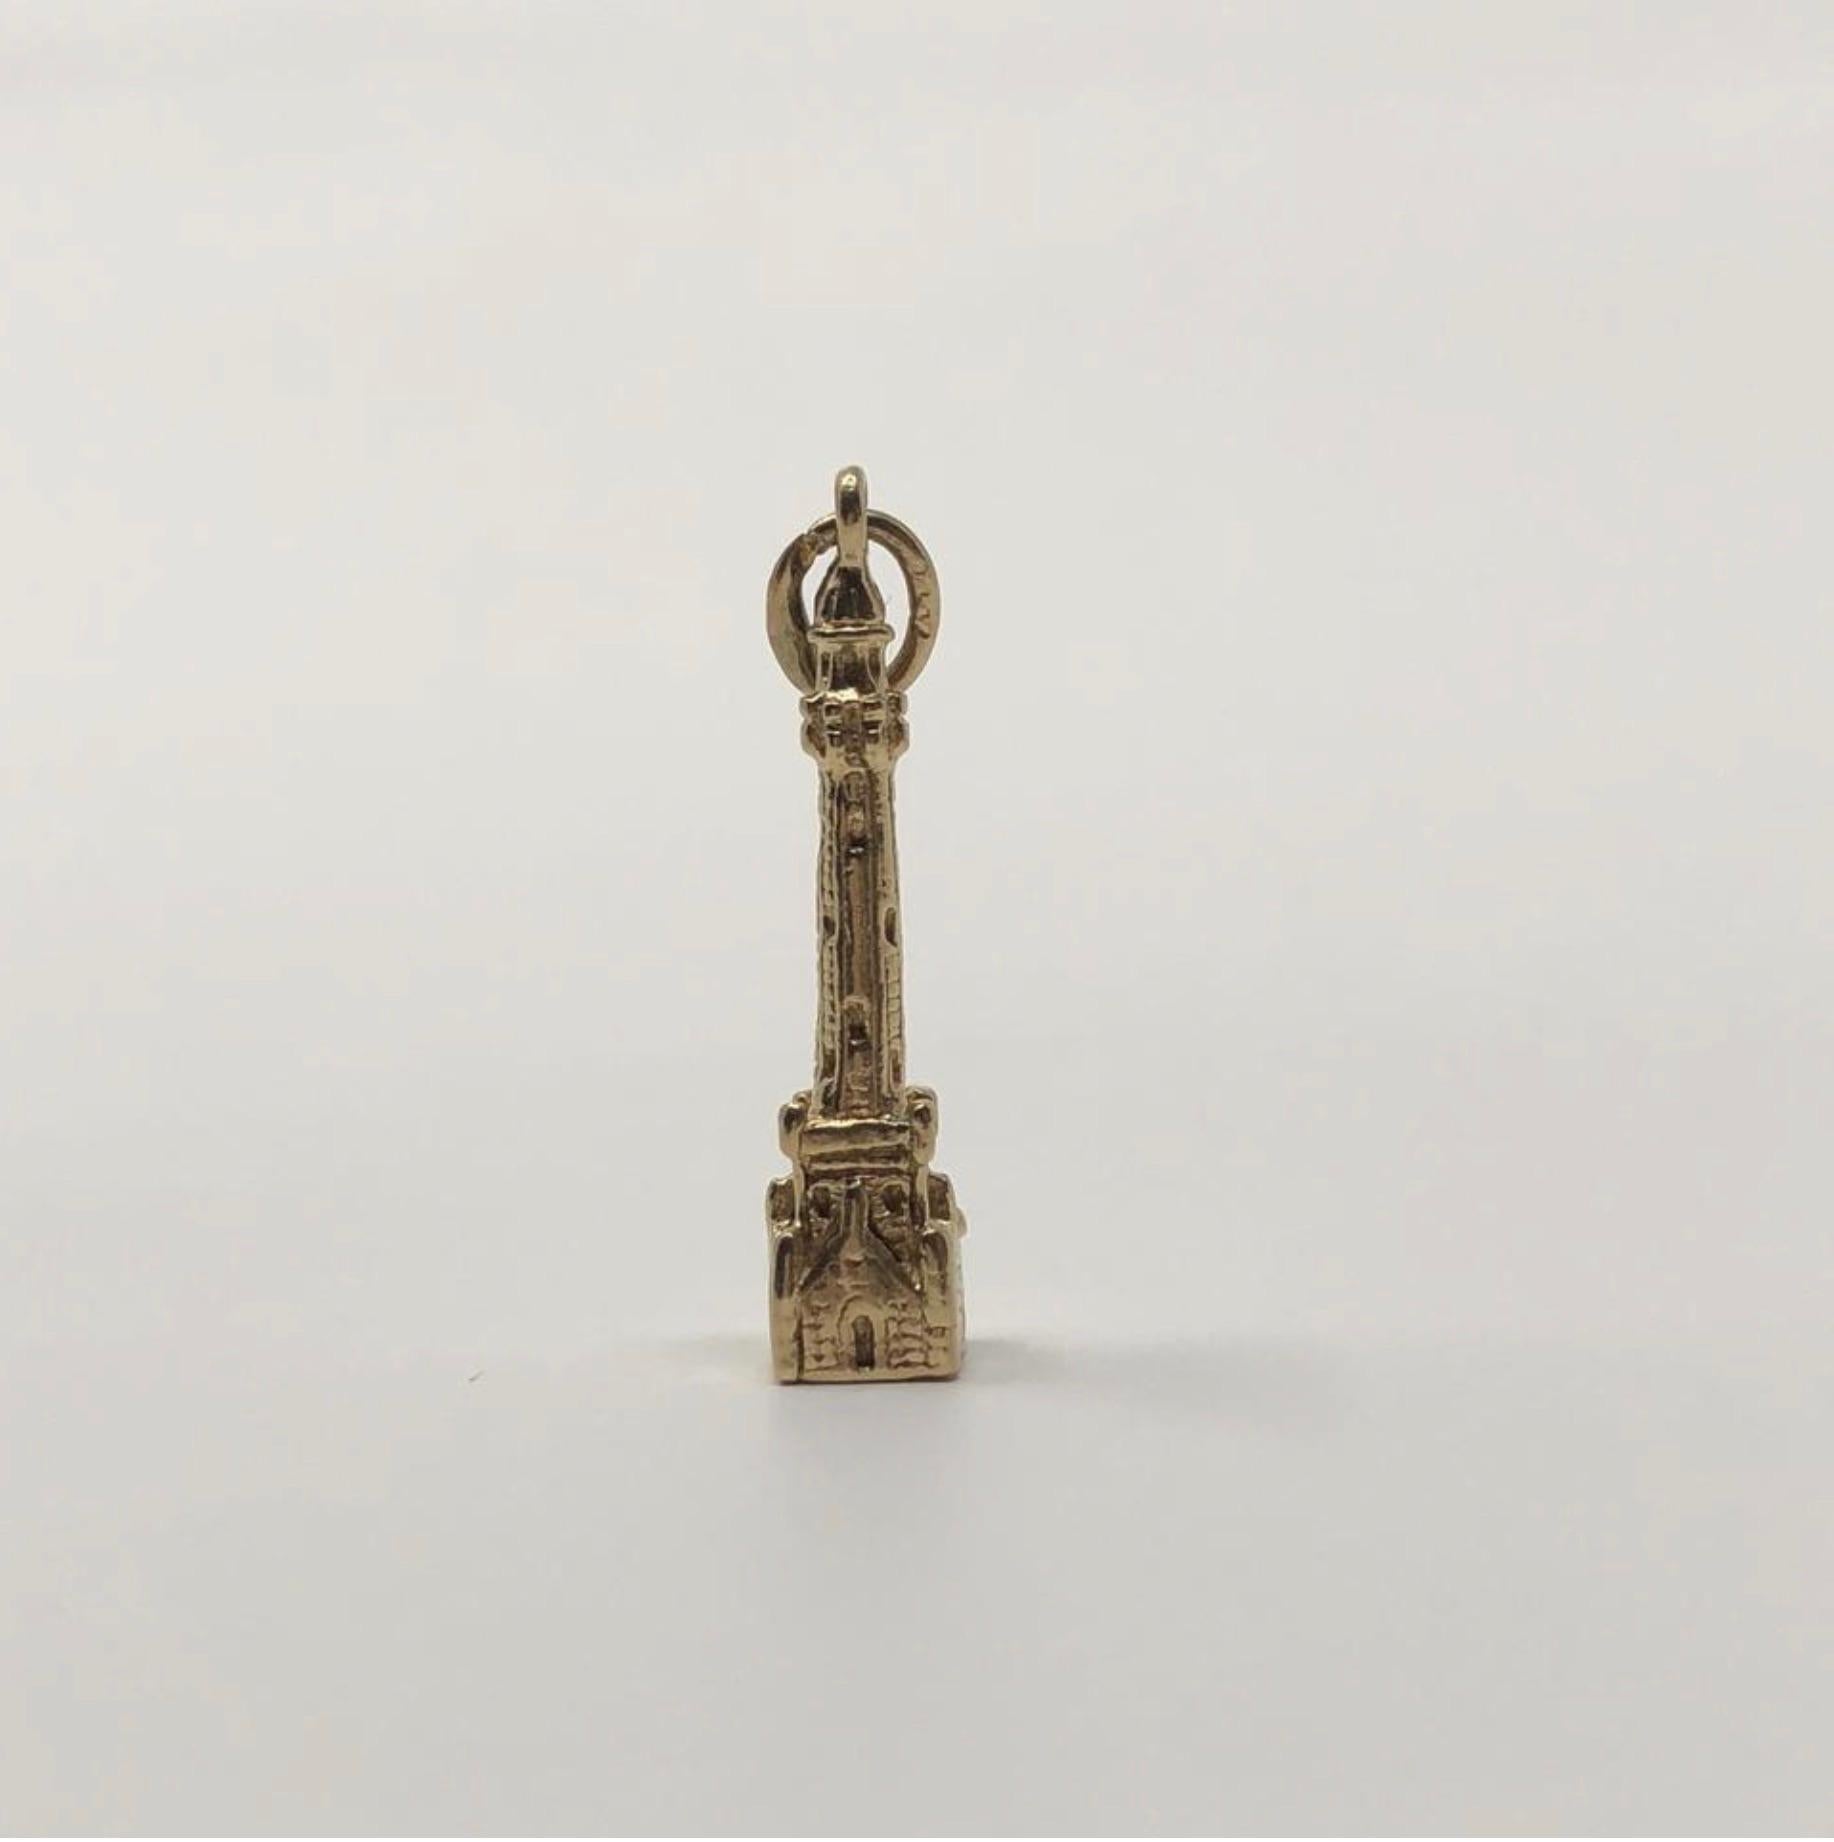 MODEL - Vintage 14k Gold Chicago Water Tower Pendant Charm

CONDITION - Exceptional! No signs of wear.

SKU - 2365-FL

ORIGINAL RETAIL PRICE - 250 + tax

MATERIAL - 14k Gold

WEIGHT - 3.5 grams

DIMENSIONS - L.25 x H1 (1.25 with bail) x D.25

COMES